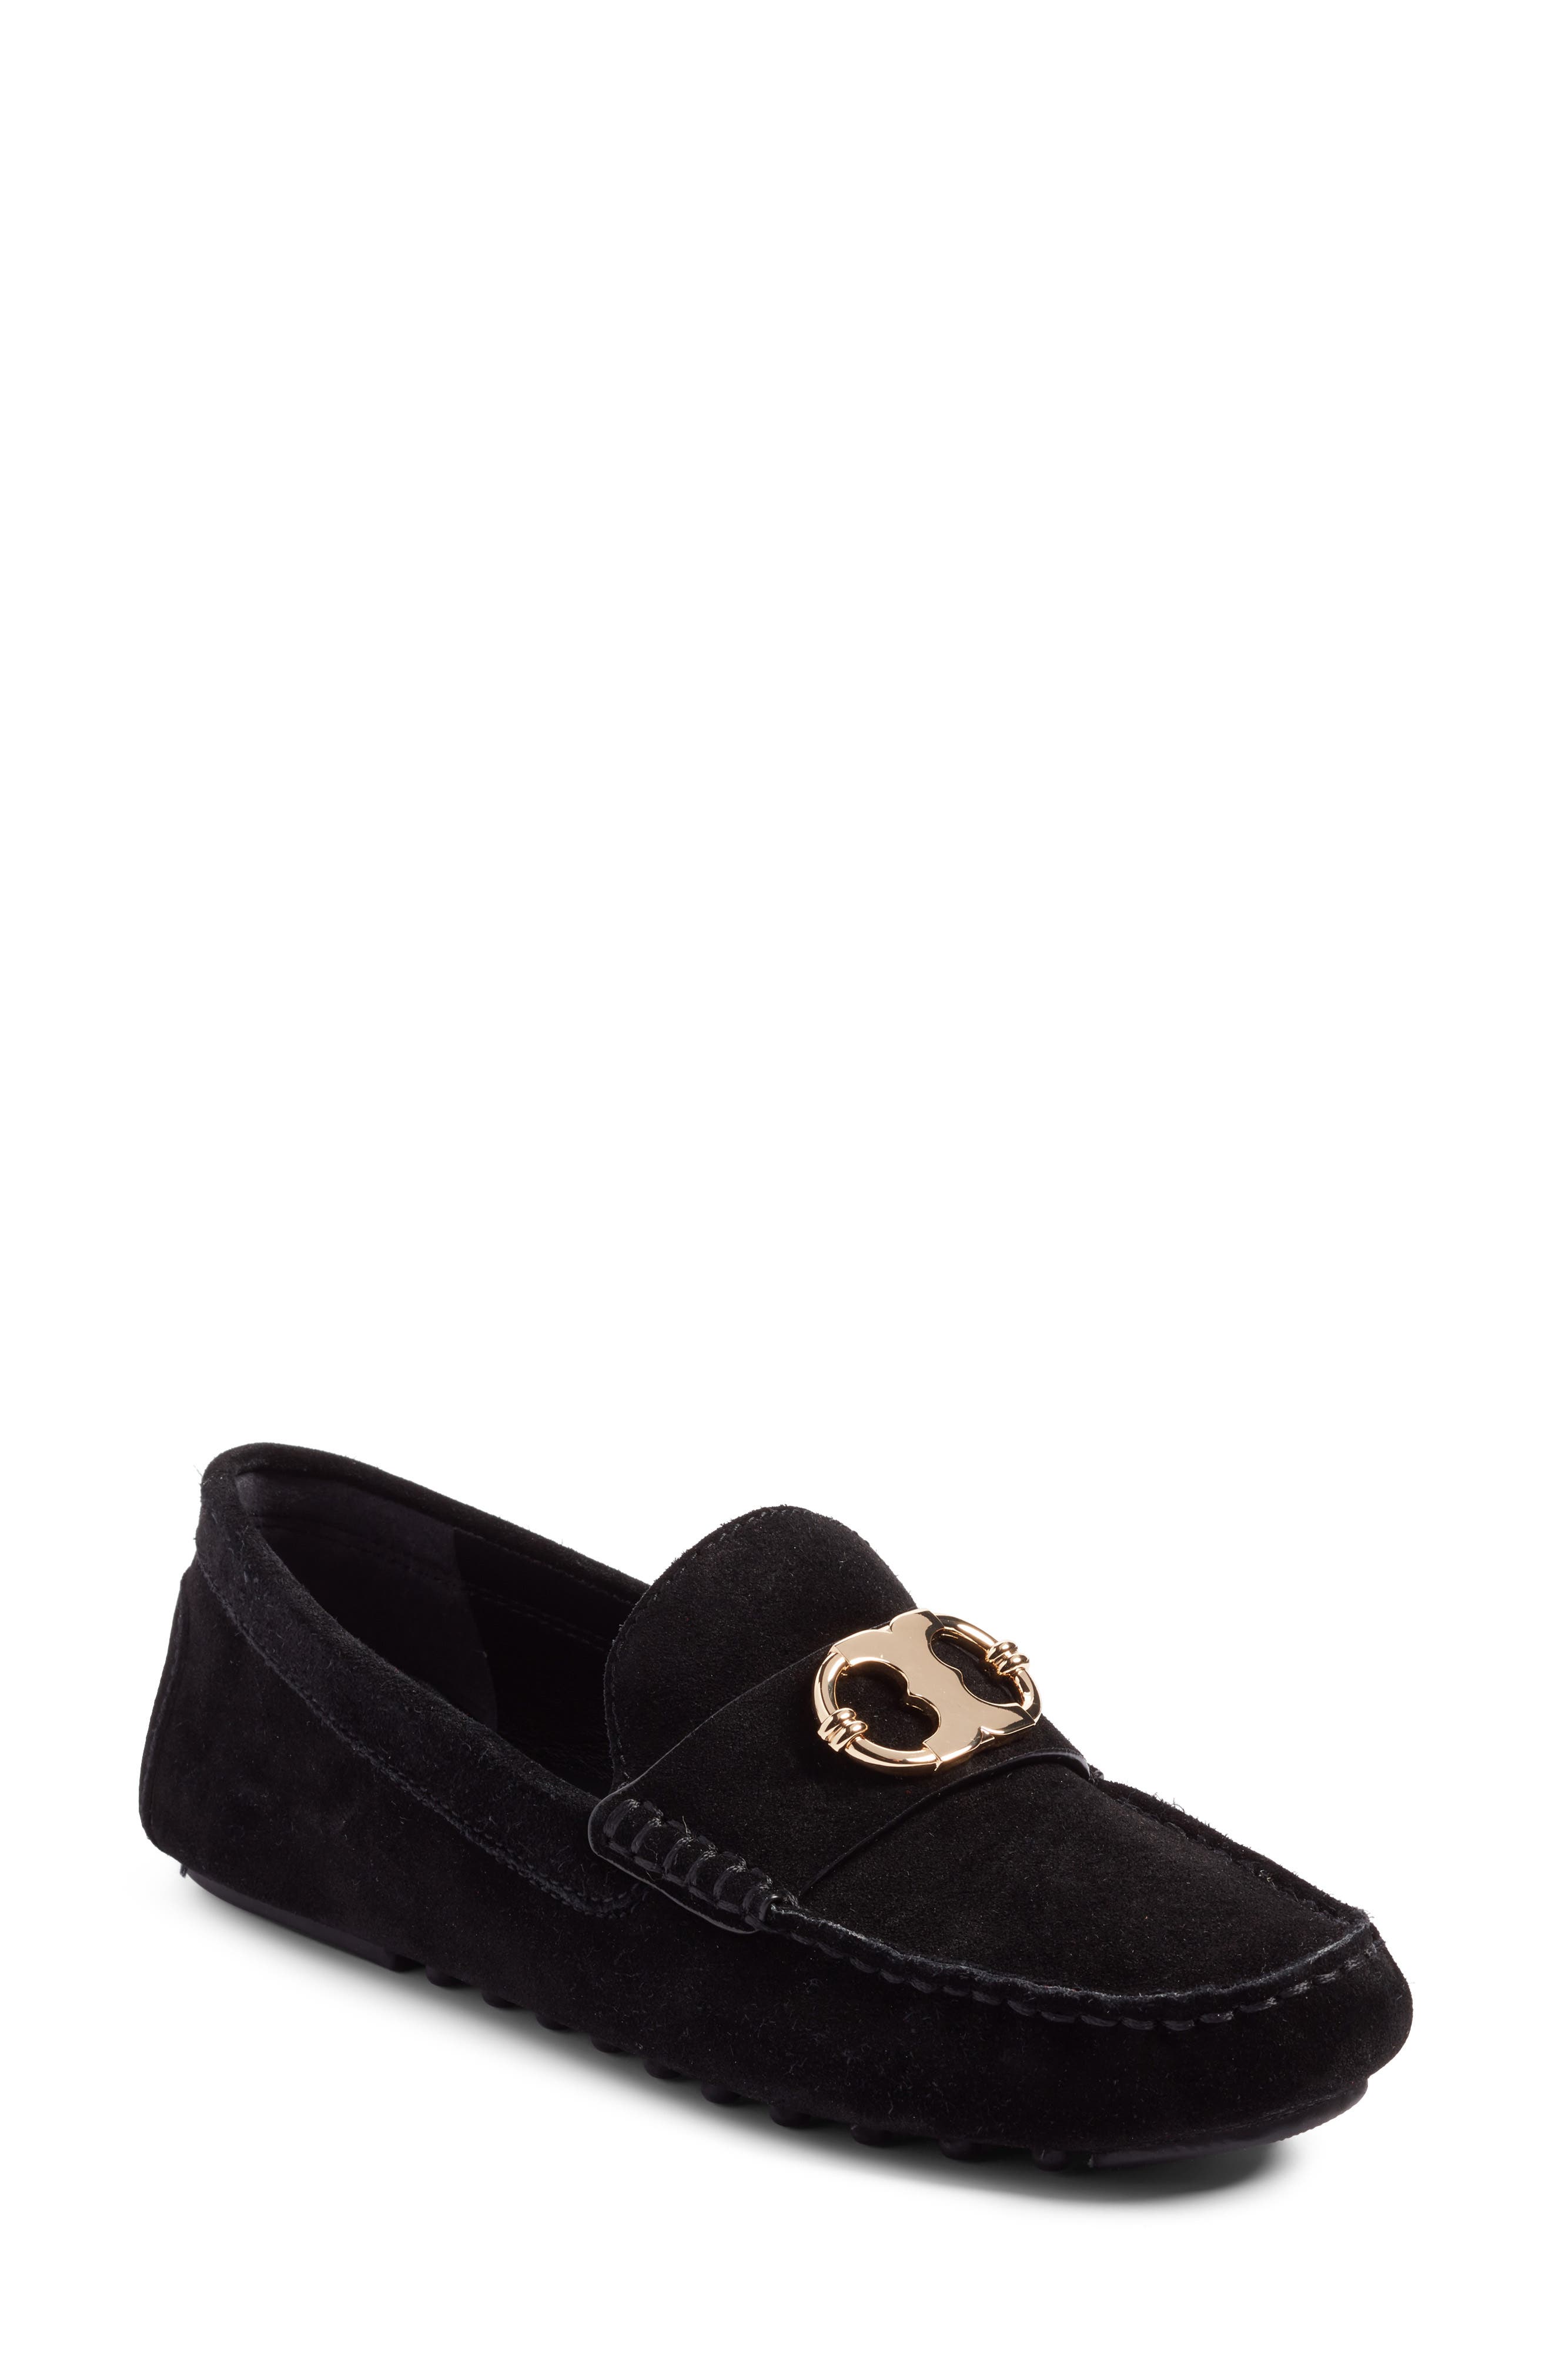 tory burch black loafers